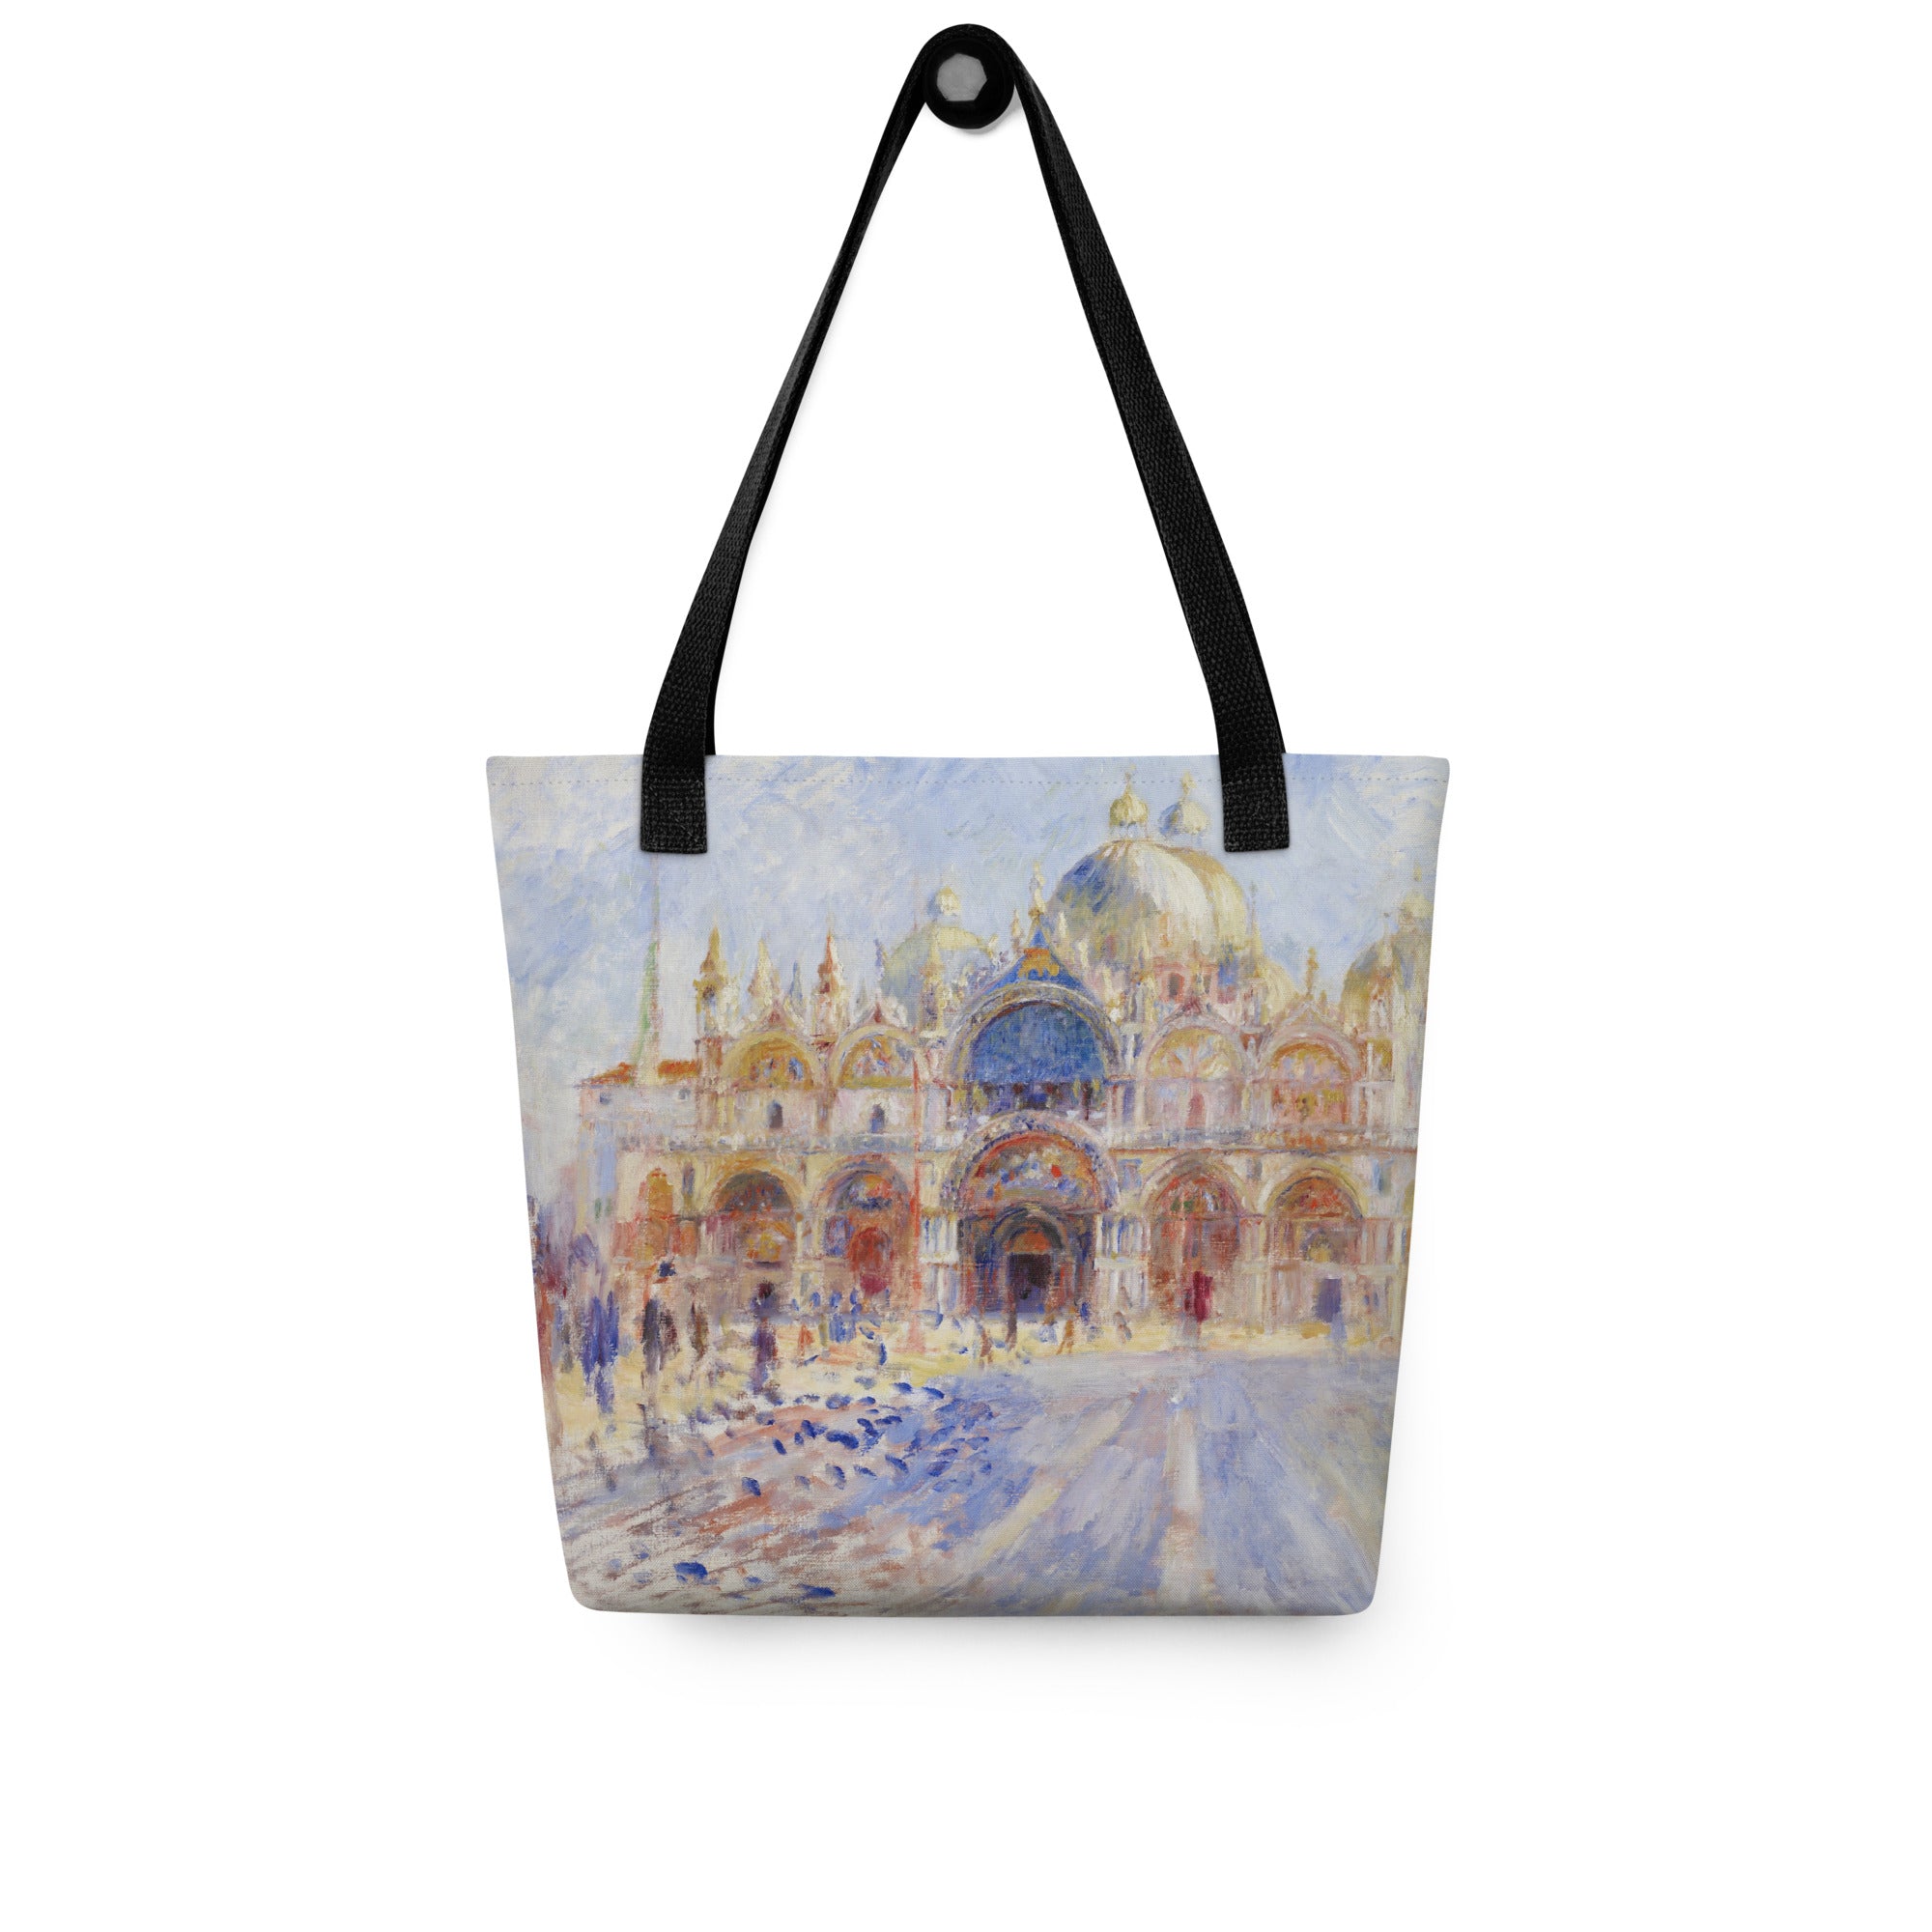 Pierre-Auguste Renoir 'The Piazza San Marco, Venice' Famous Painting Totebag | Allover Print Art Tote Bag